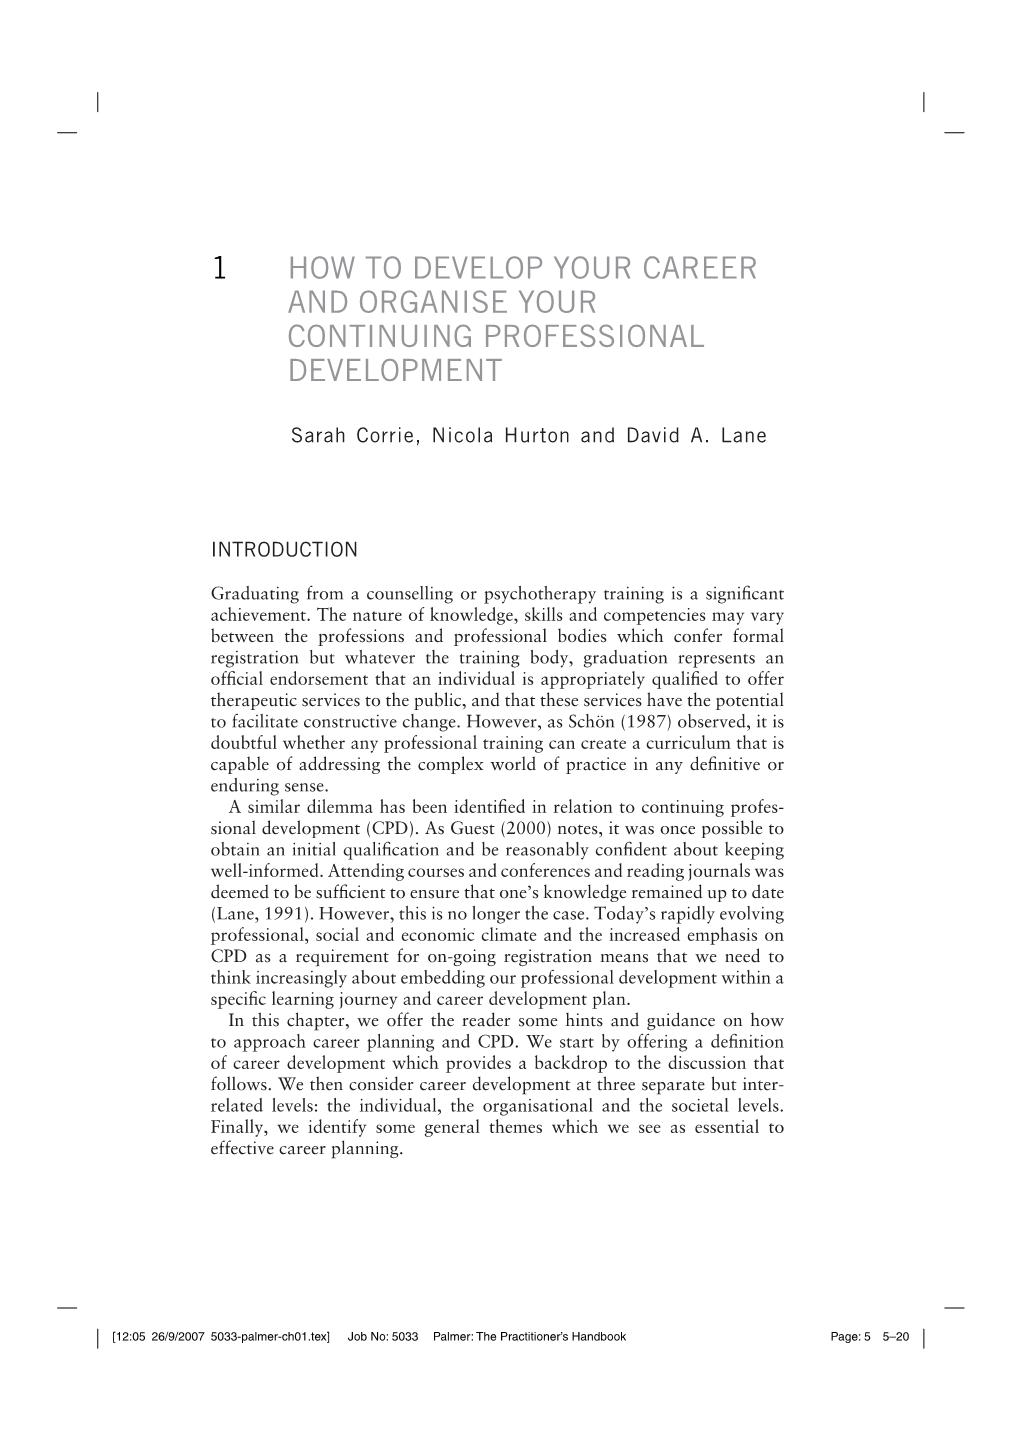 1 How to Develop Your Career and Organise Your Continuing Professional Development